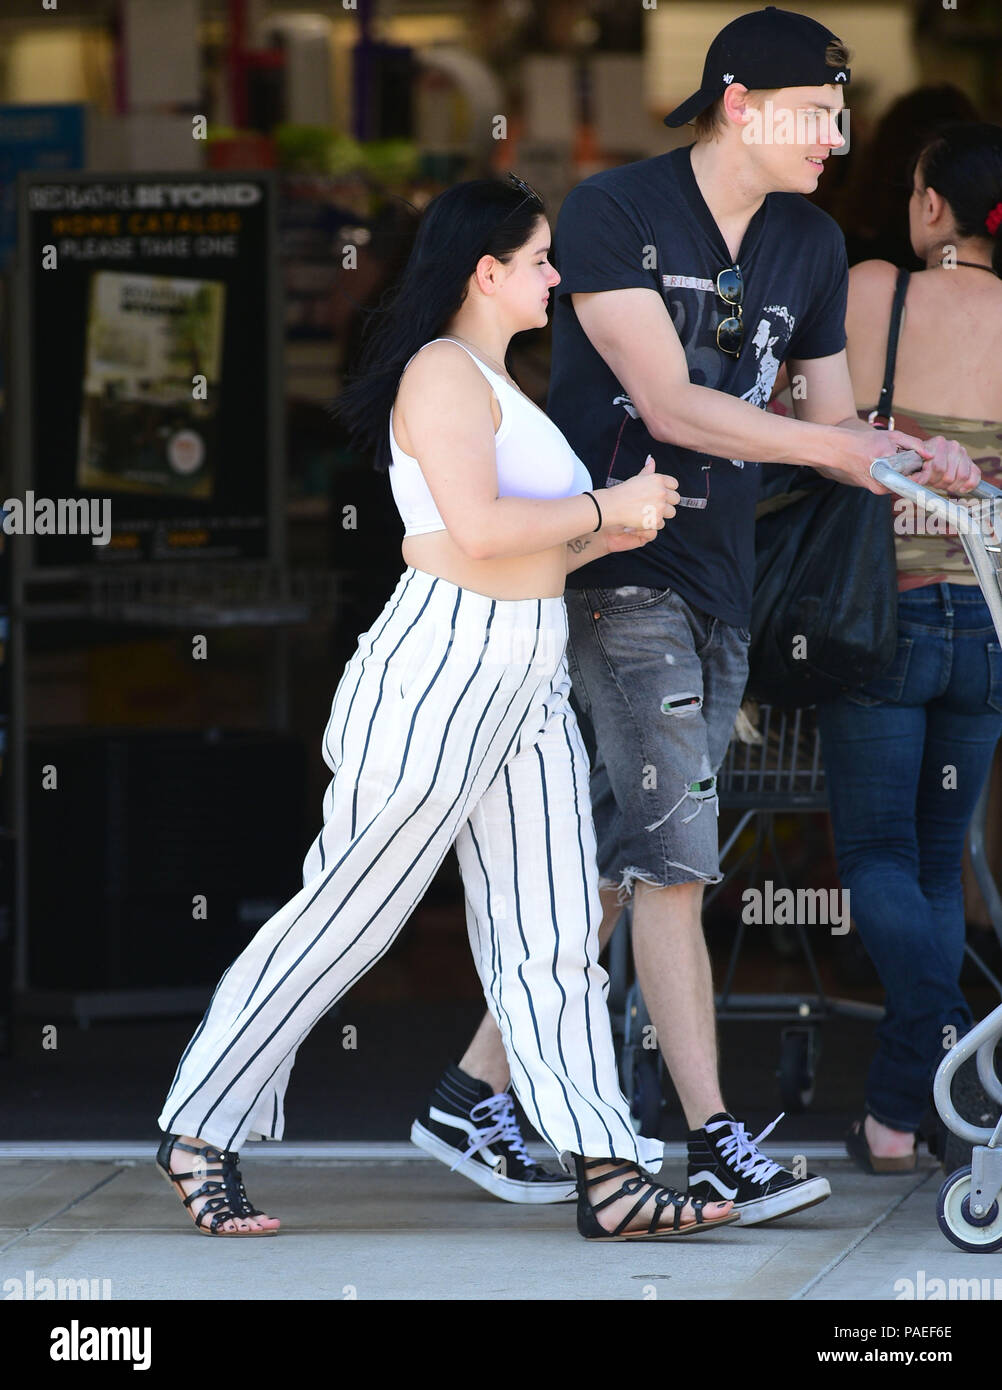 Ariel Winter goes out for lunch wearing mesh panel leggings with Levi  Meaden and friends Featuring: Ariel Winter, Levi Meaden Where: Los Angeles,  California, United States When: 30 Jan 2018 Credit: WENN.com